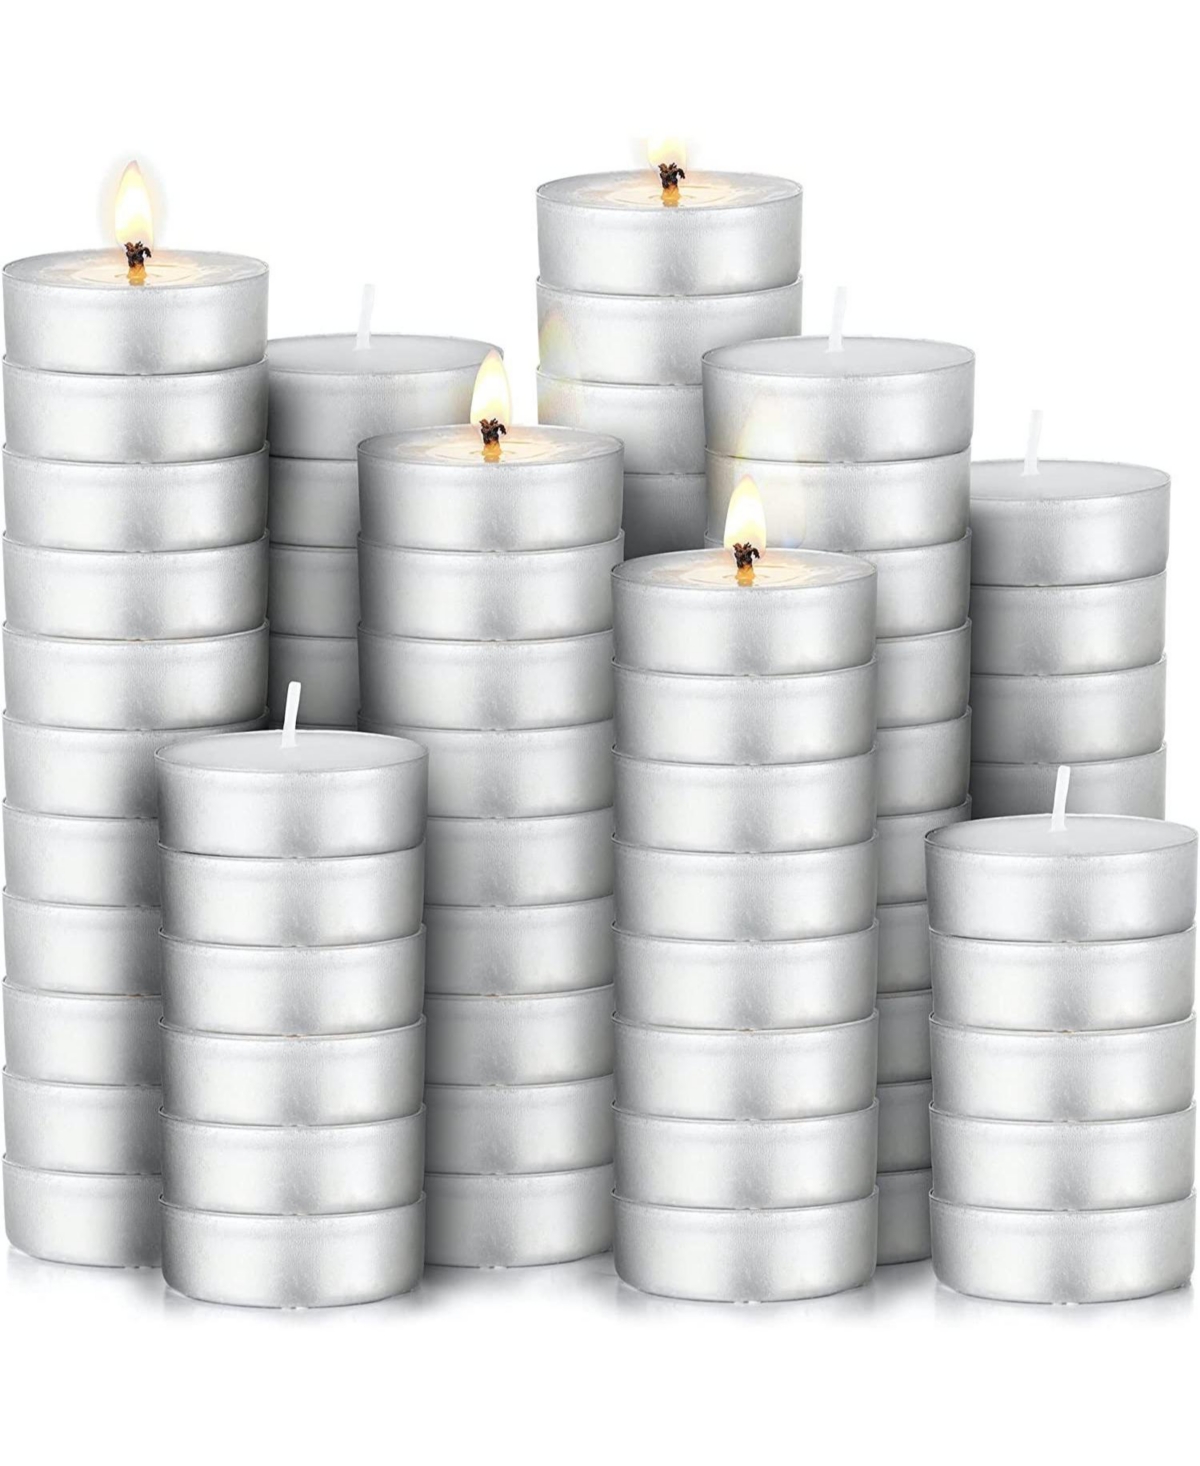 100 Pack Smokeless Unscented Long Burning Tea Lights Candles for Home - White